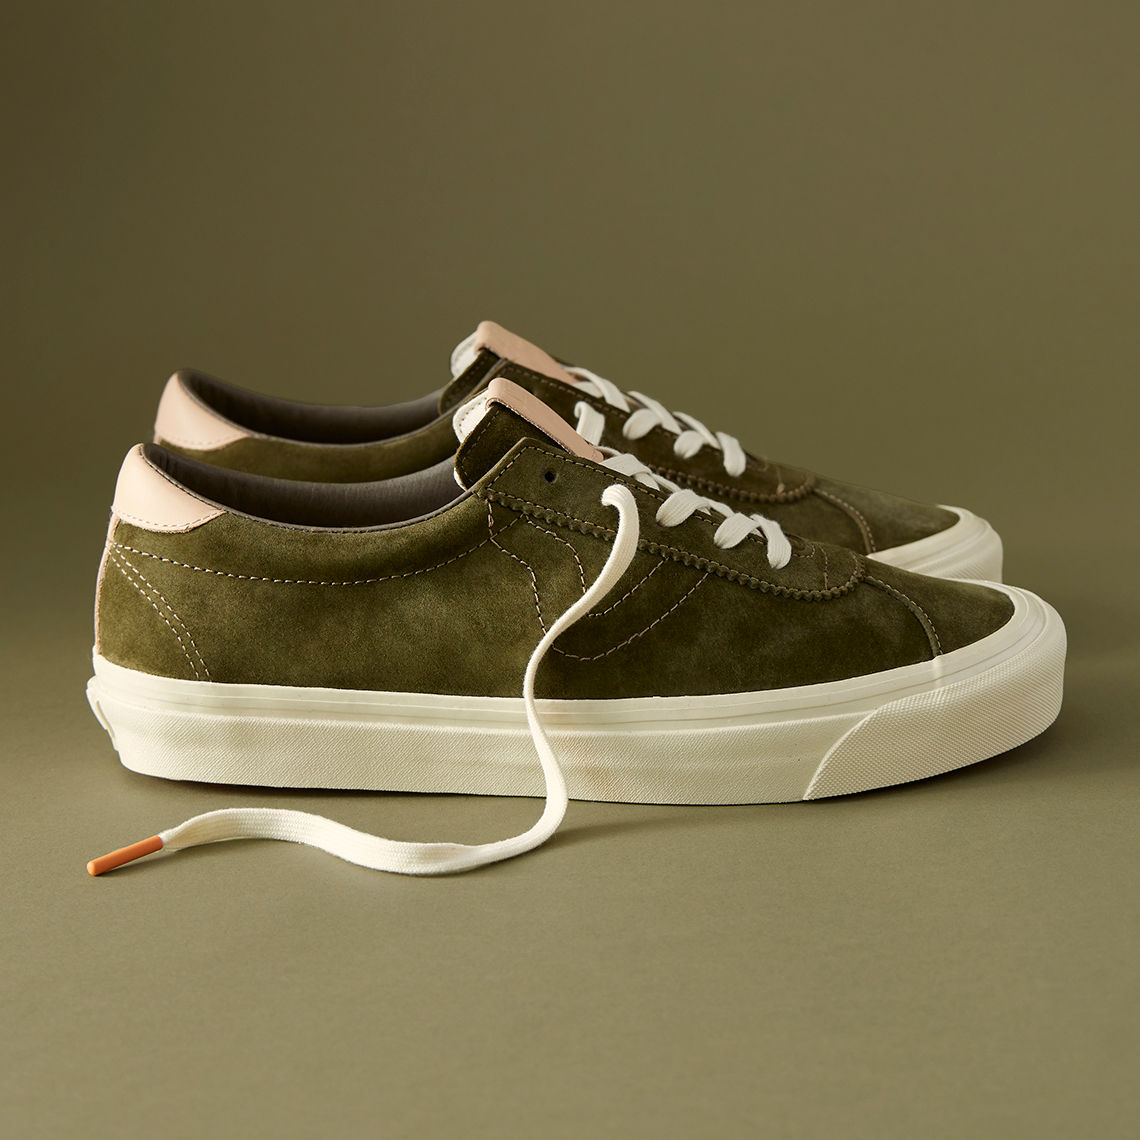 Todd Snyder Vans The Dirty Martini Release Date 4